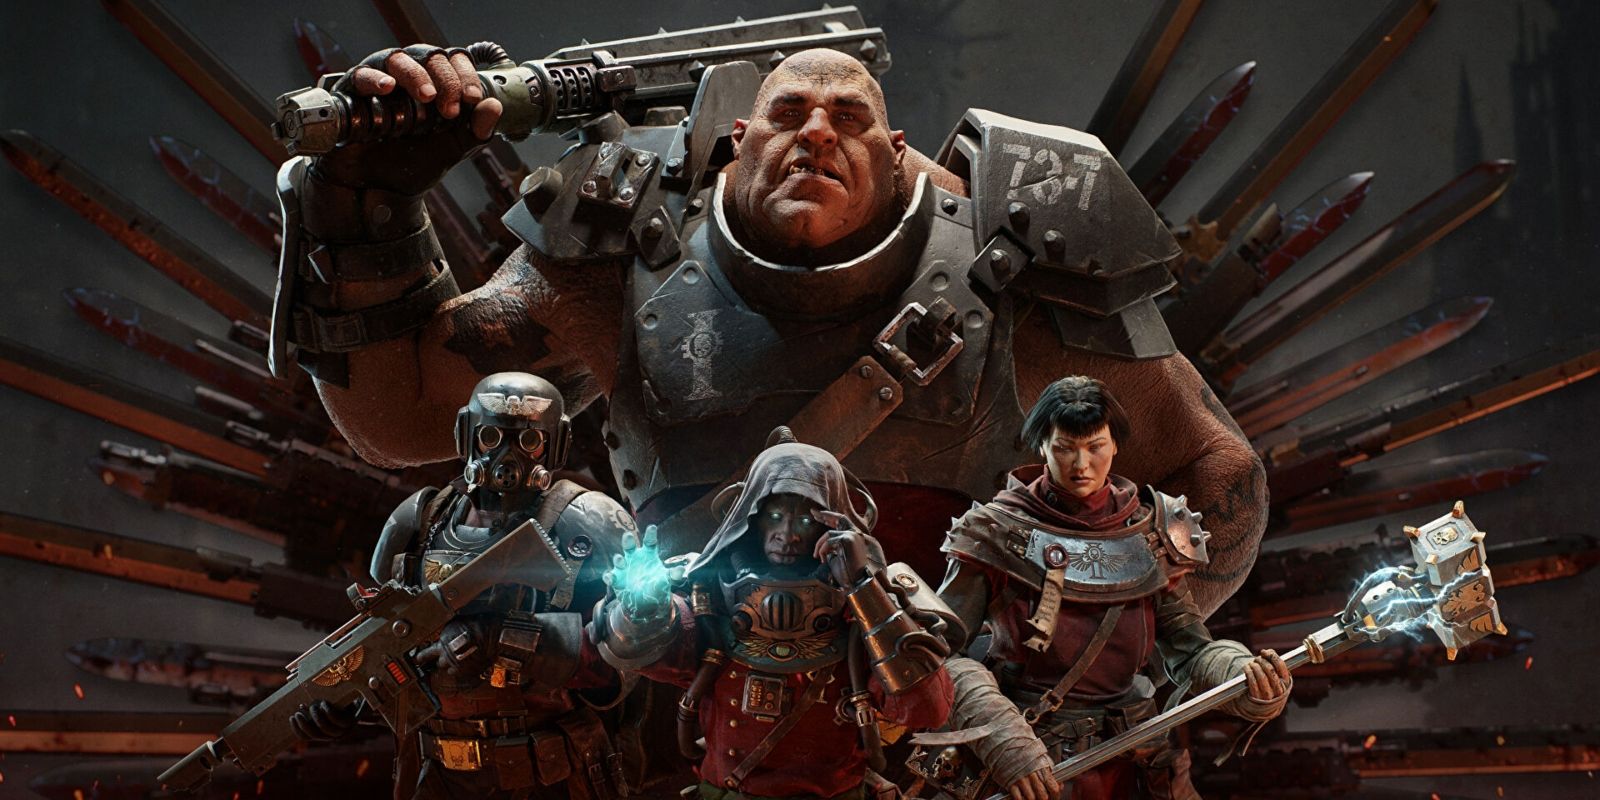 A group shot of the available characters in Warhammer 40k Darktide